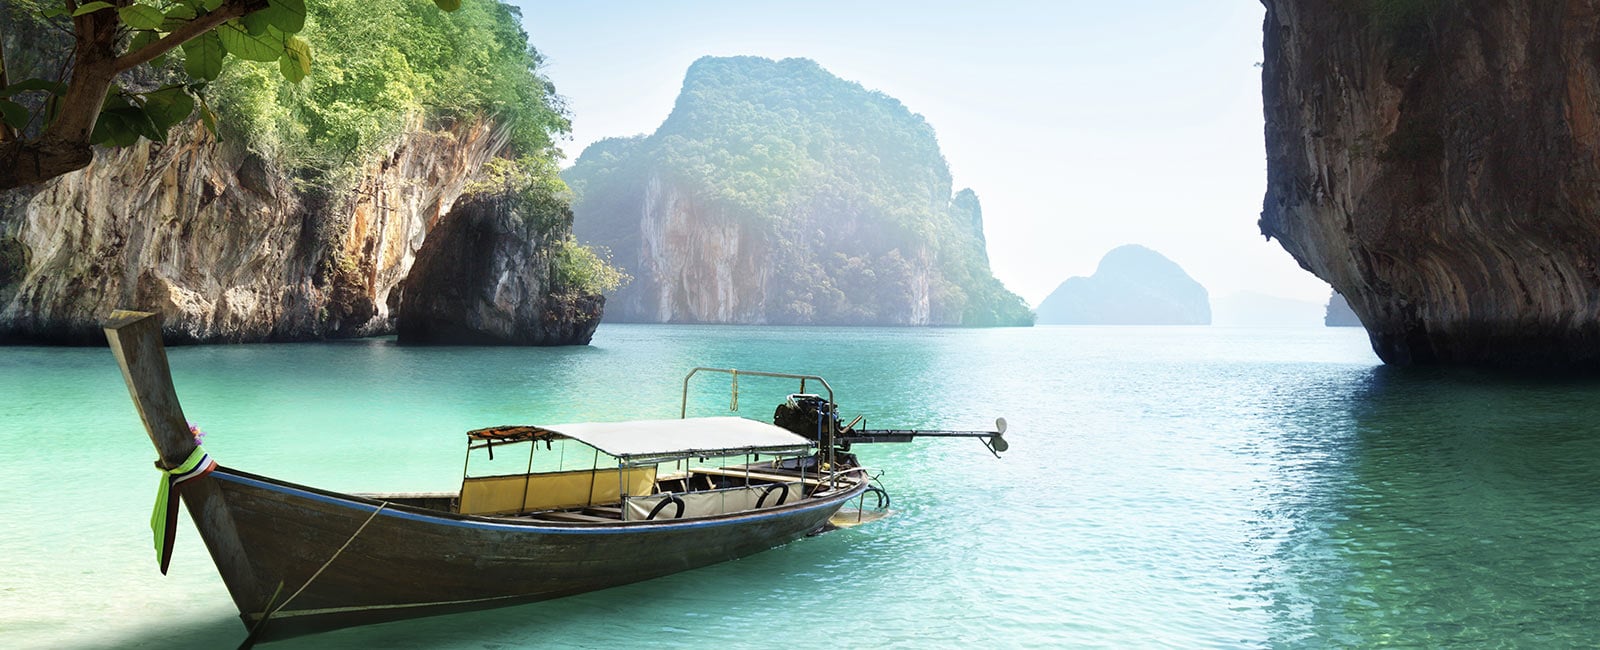 Enjoy A Vacation in Thailand with Hilton Grand Vacations